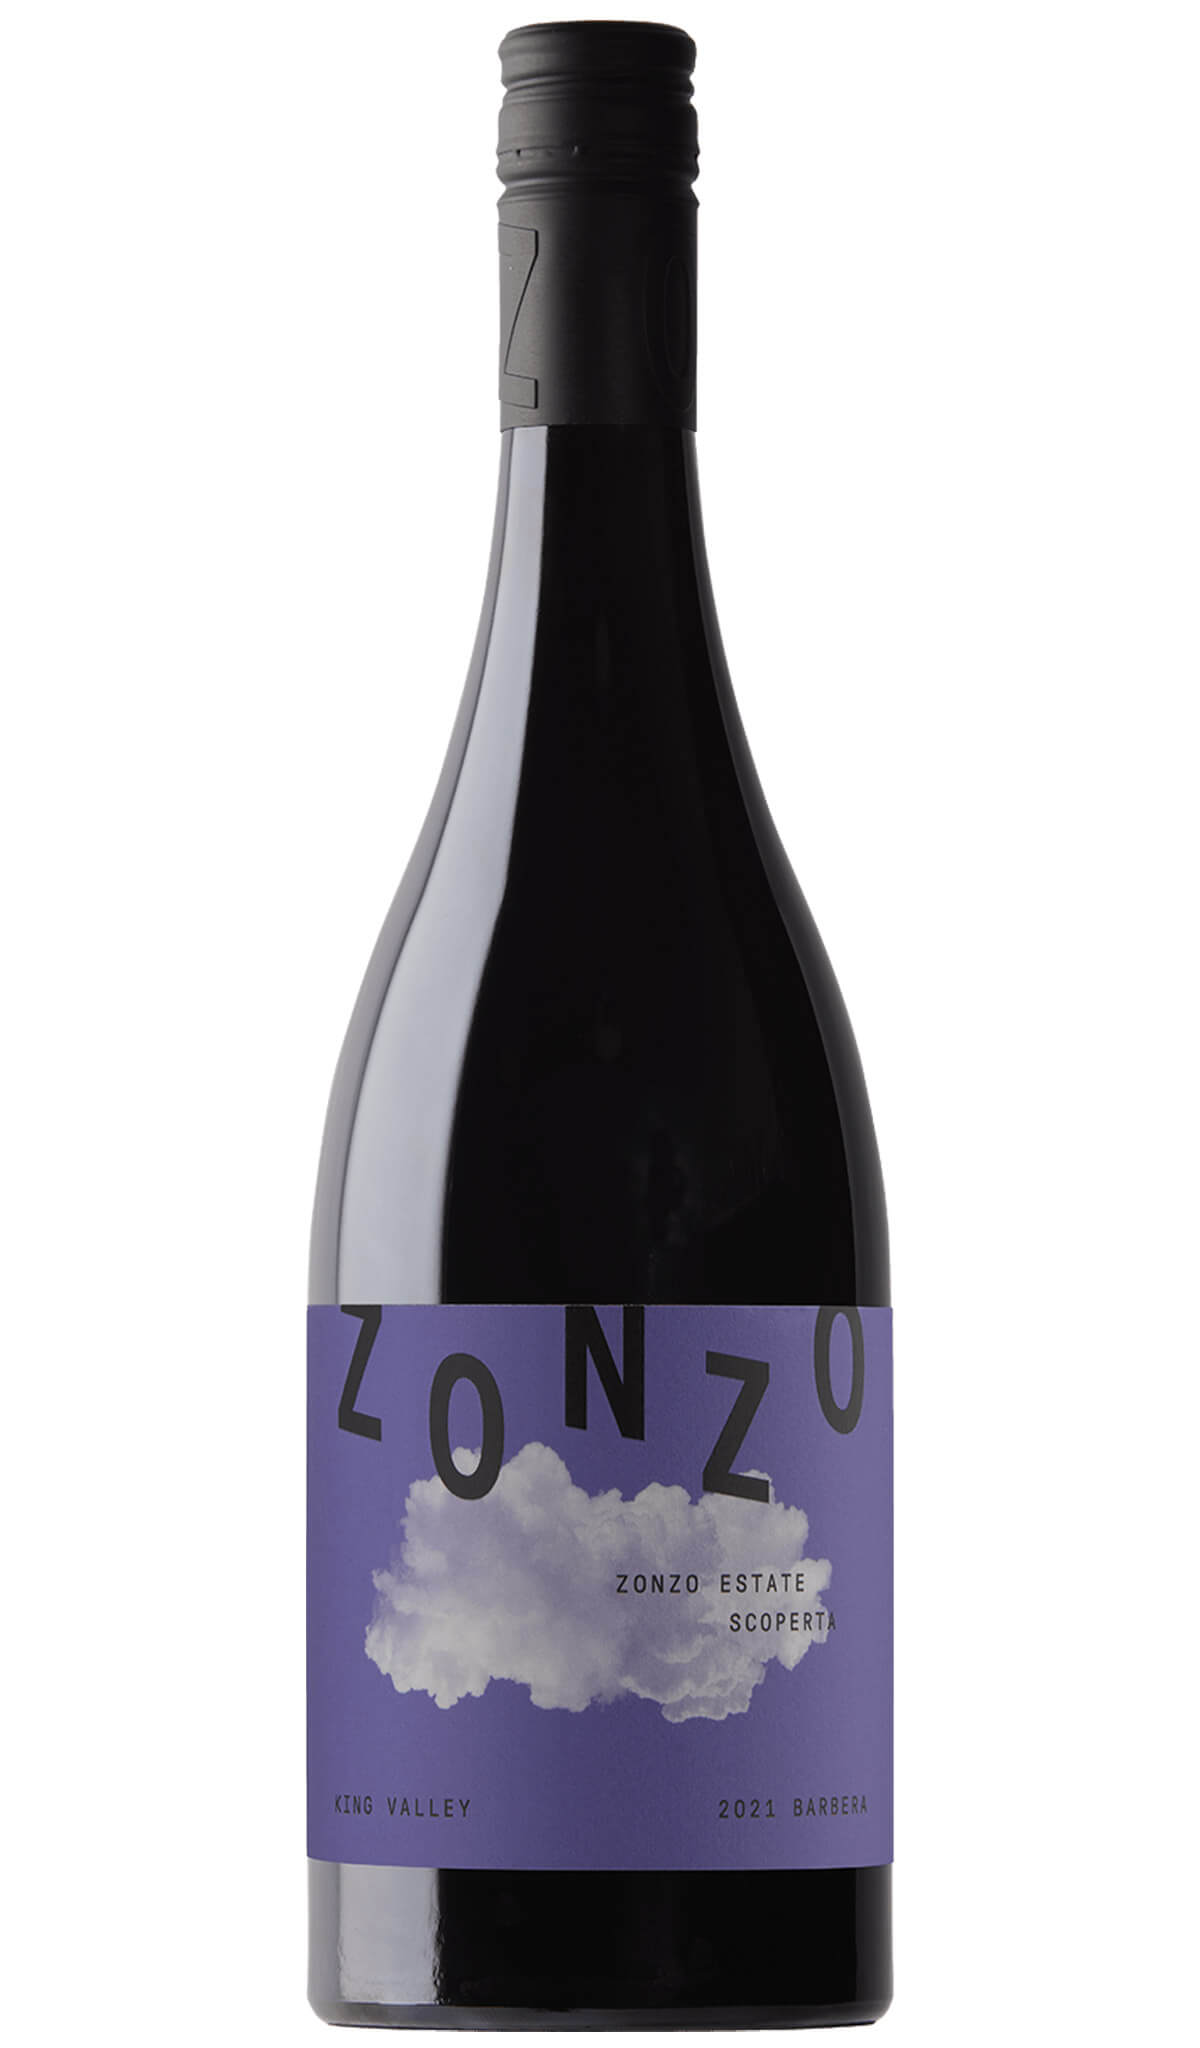 Find out more, explore the range and purchase Zonzo Estate Scoperta Barbera 2021 (King Valley) available online at Wine Sellers Direct - Australia's independent liquor specialists.